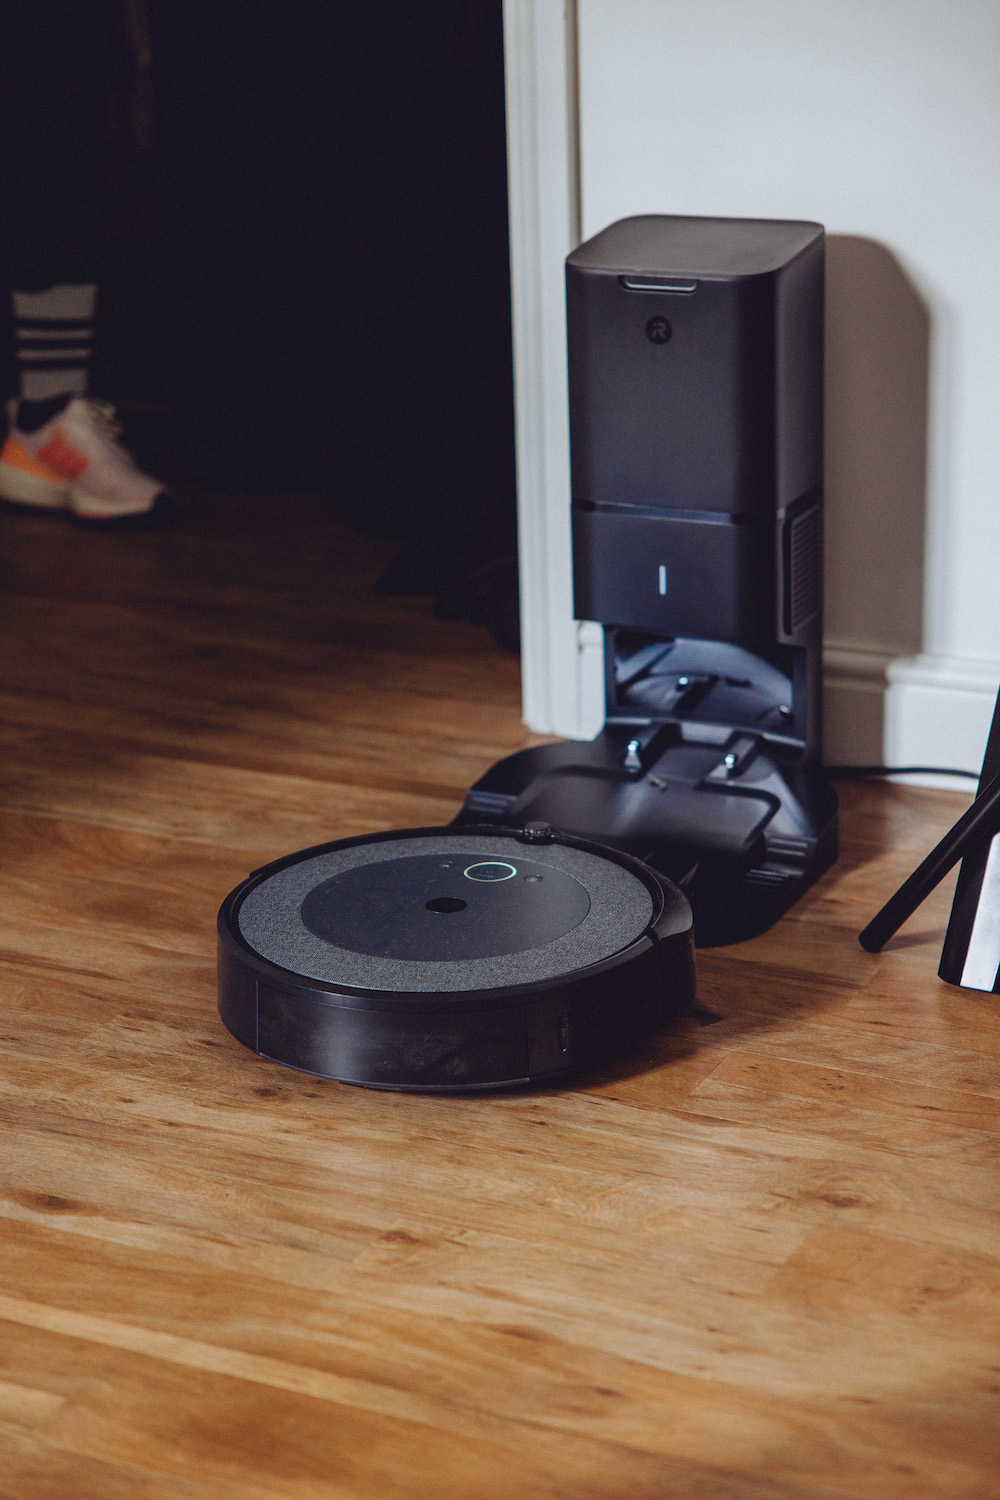 iRobot Roomba i5+ Robot Vacuum Returning to base after cleaning 